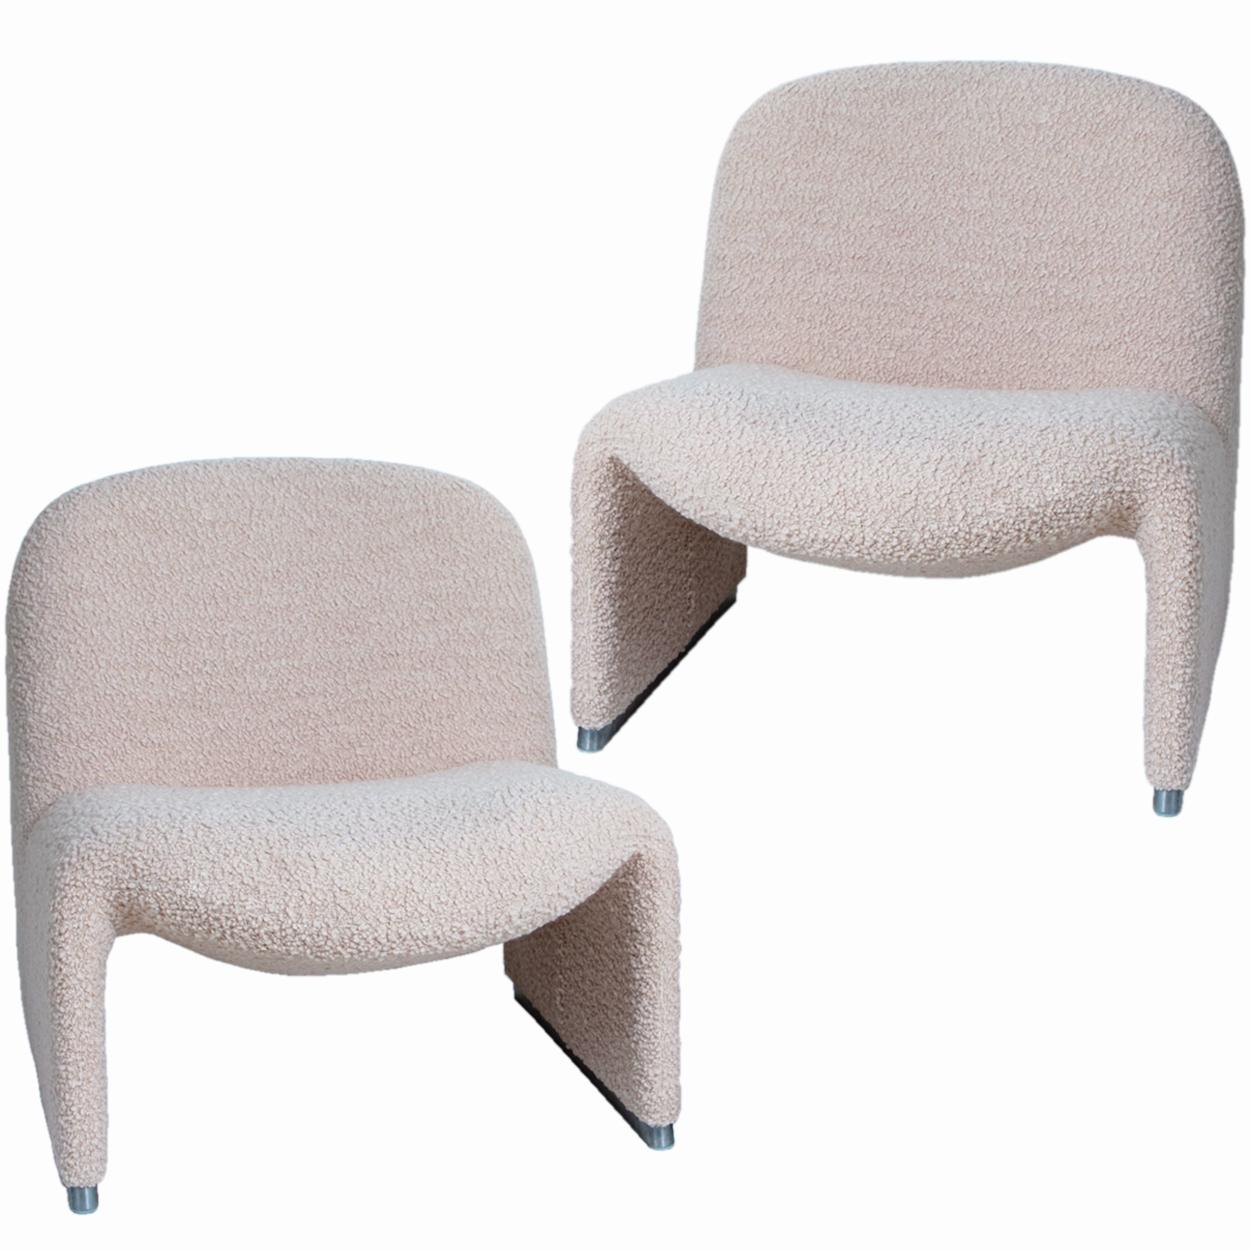 Giancarlo Piretti designed lounge “Alky” chairs newly upholstered in a high-end Bouclé taupe fabric by Dedar, Nibus 04- 70%WO 15%CO 10%PA 5%PES.
Aluminum frame and polished chrome foot rests. Beautiful organic curves reminiscent of Pierre Paulin